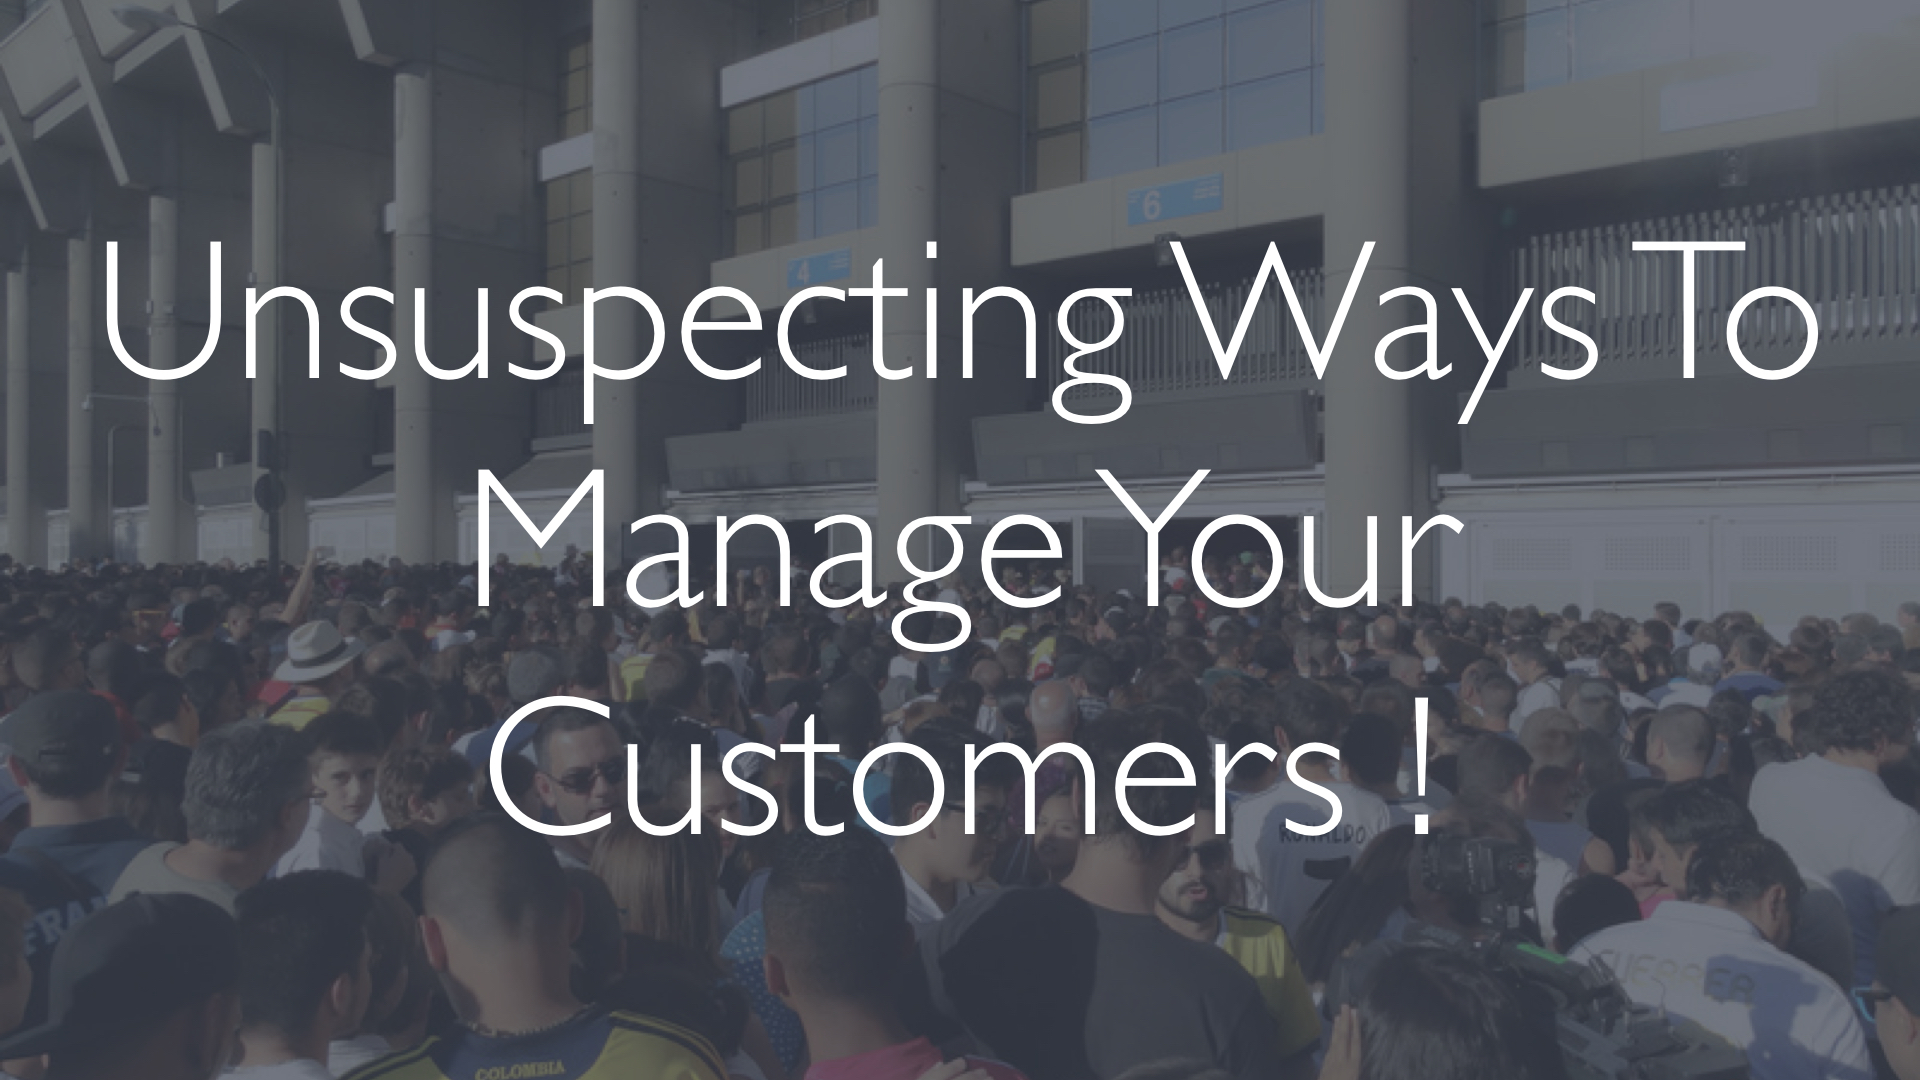 Unsuspecting Ways To Manage Your Customers!